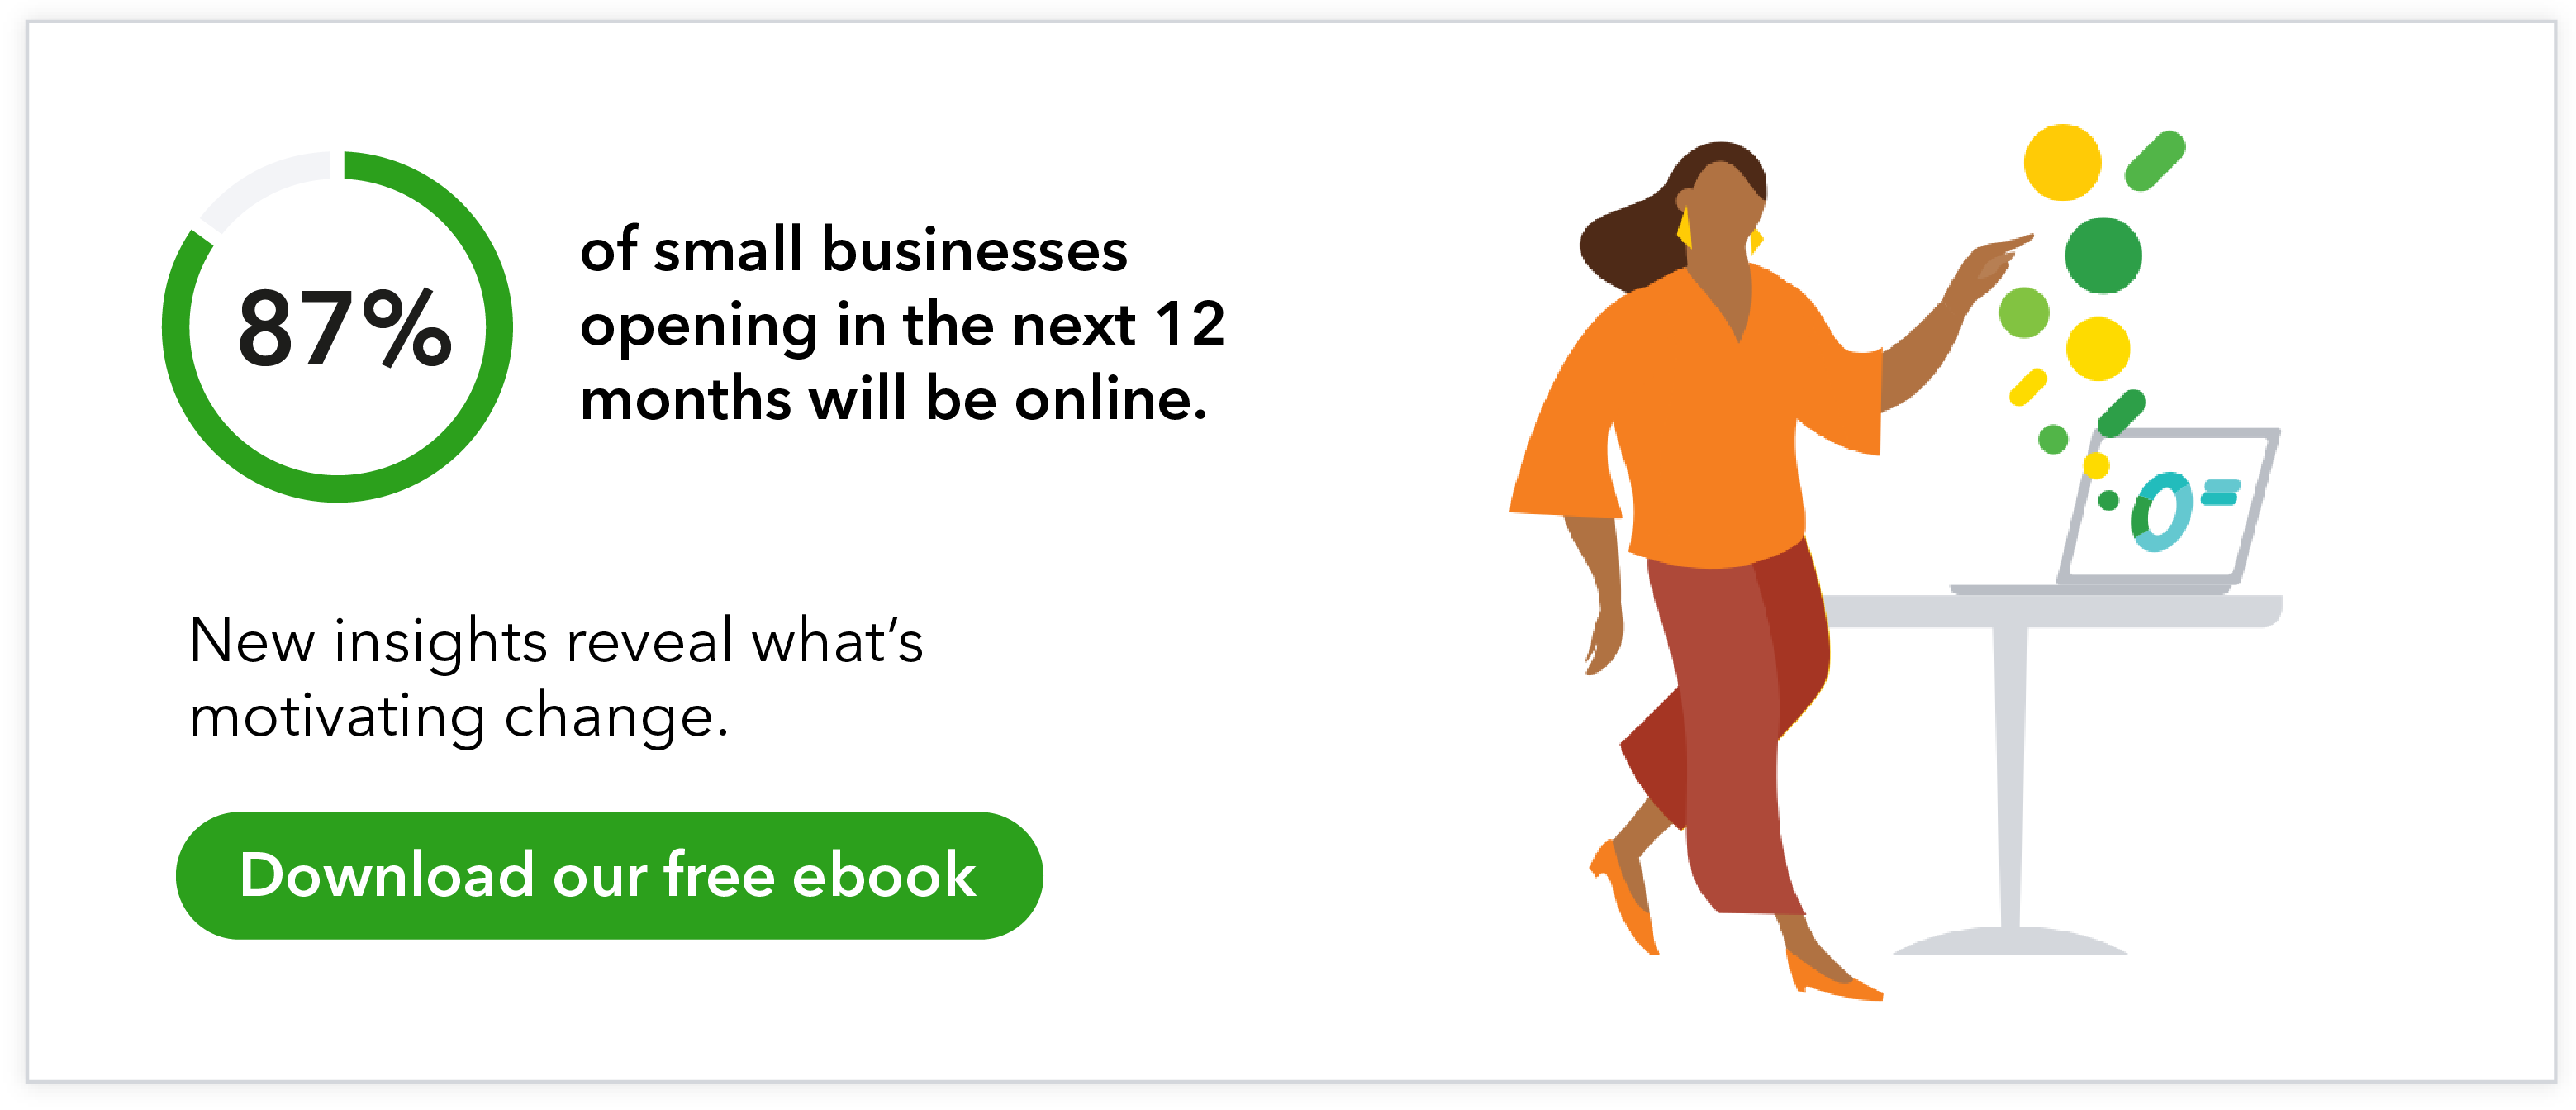 87% of small businesses opening in the next 12 months will be online. New insights reveal what's motivating change. Download our free ebook.